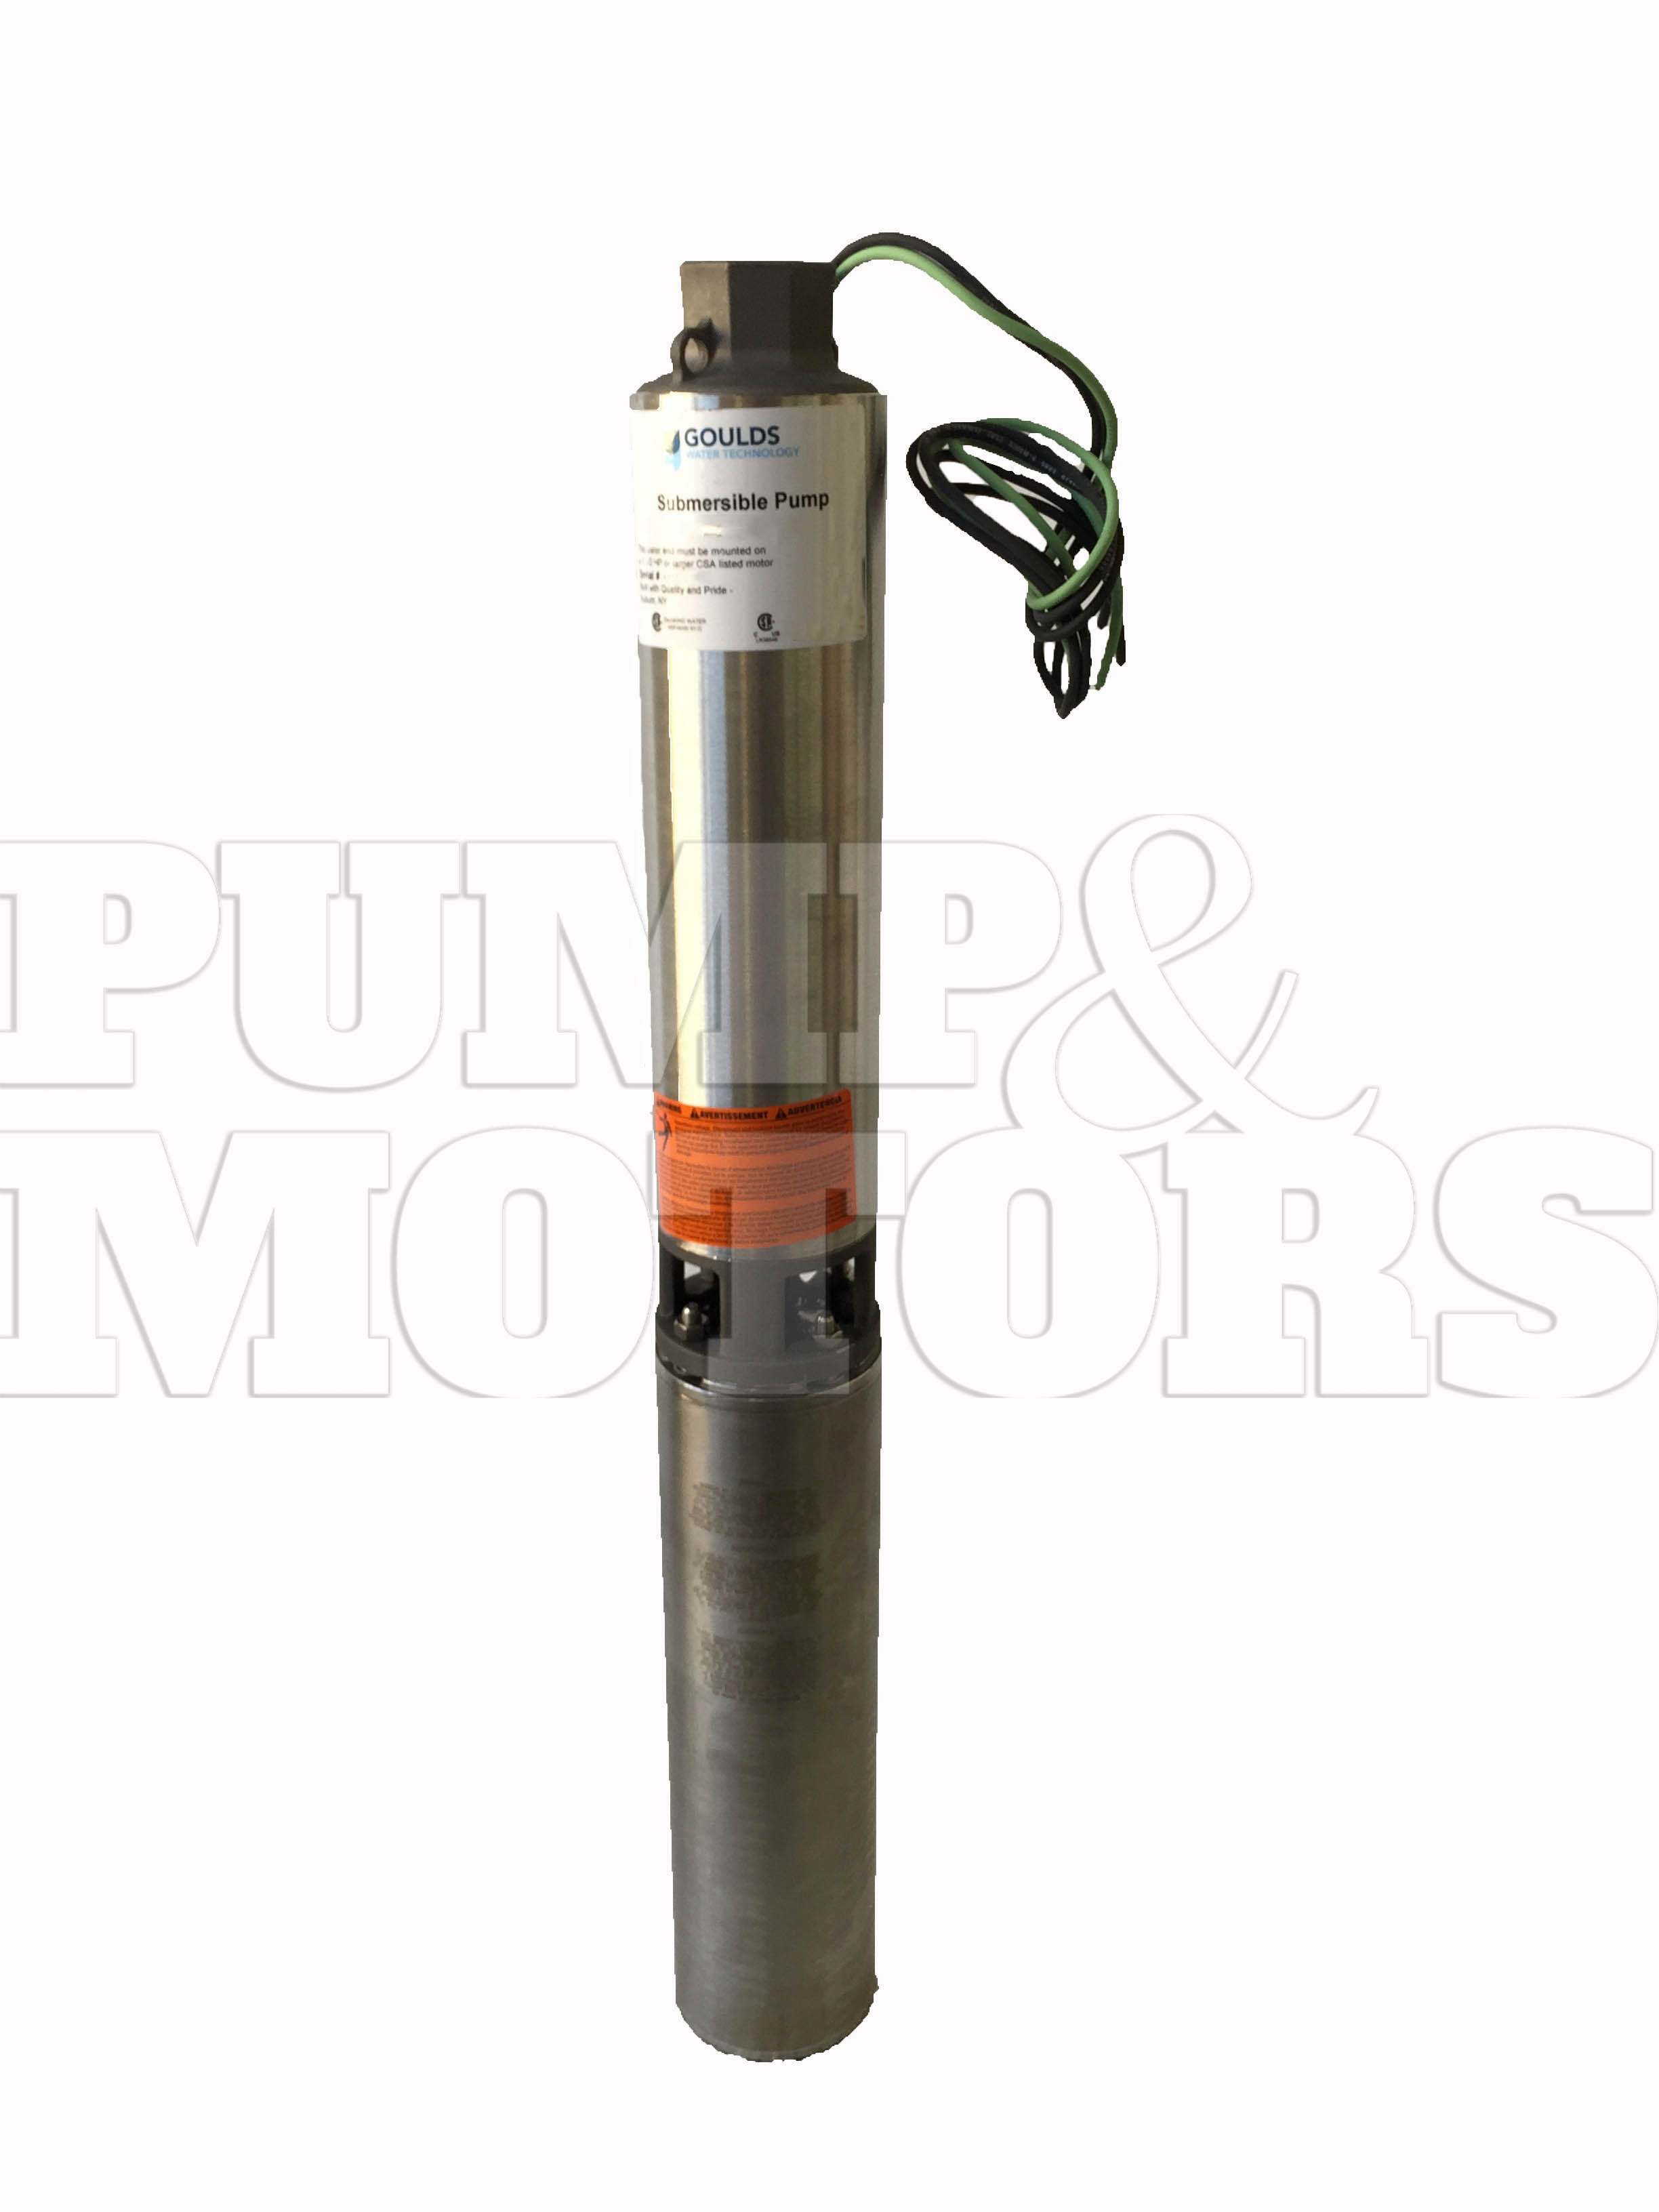 Goulds 5SB05422C 1/2 HP 230V 4" Submersible Water Well Pump 5GPM